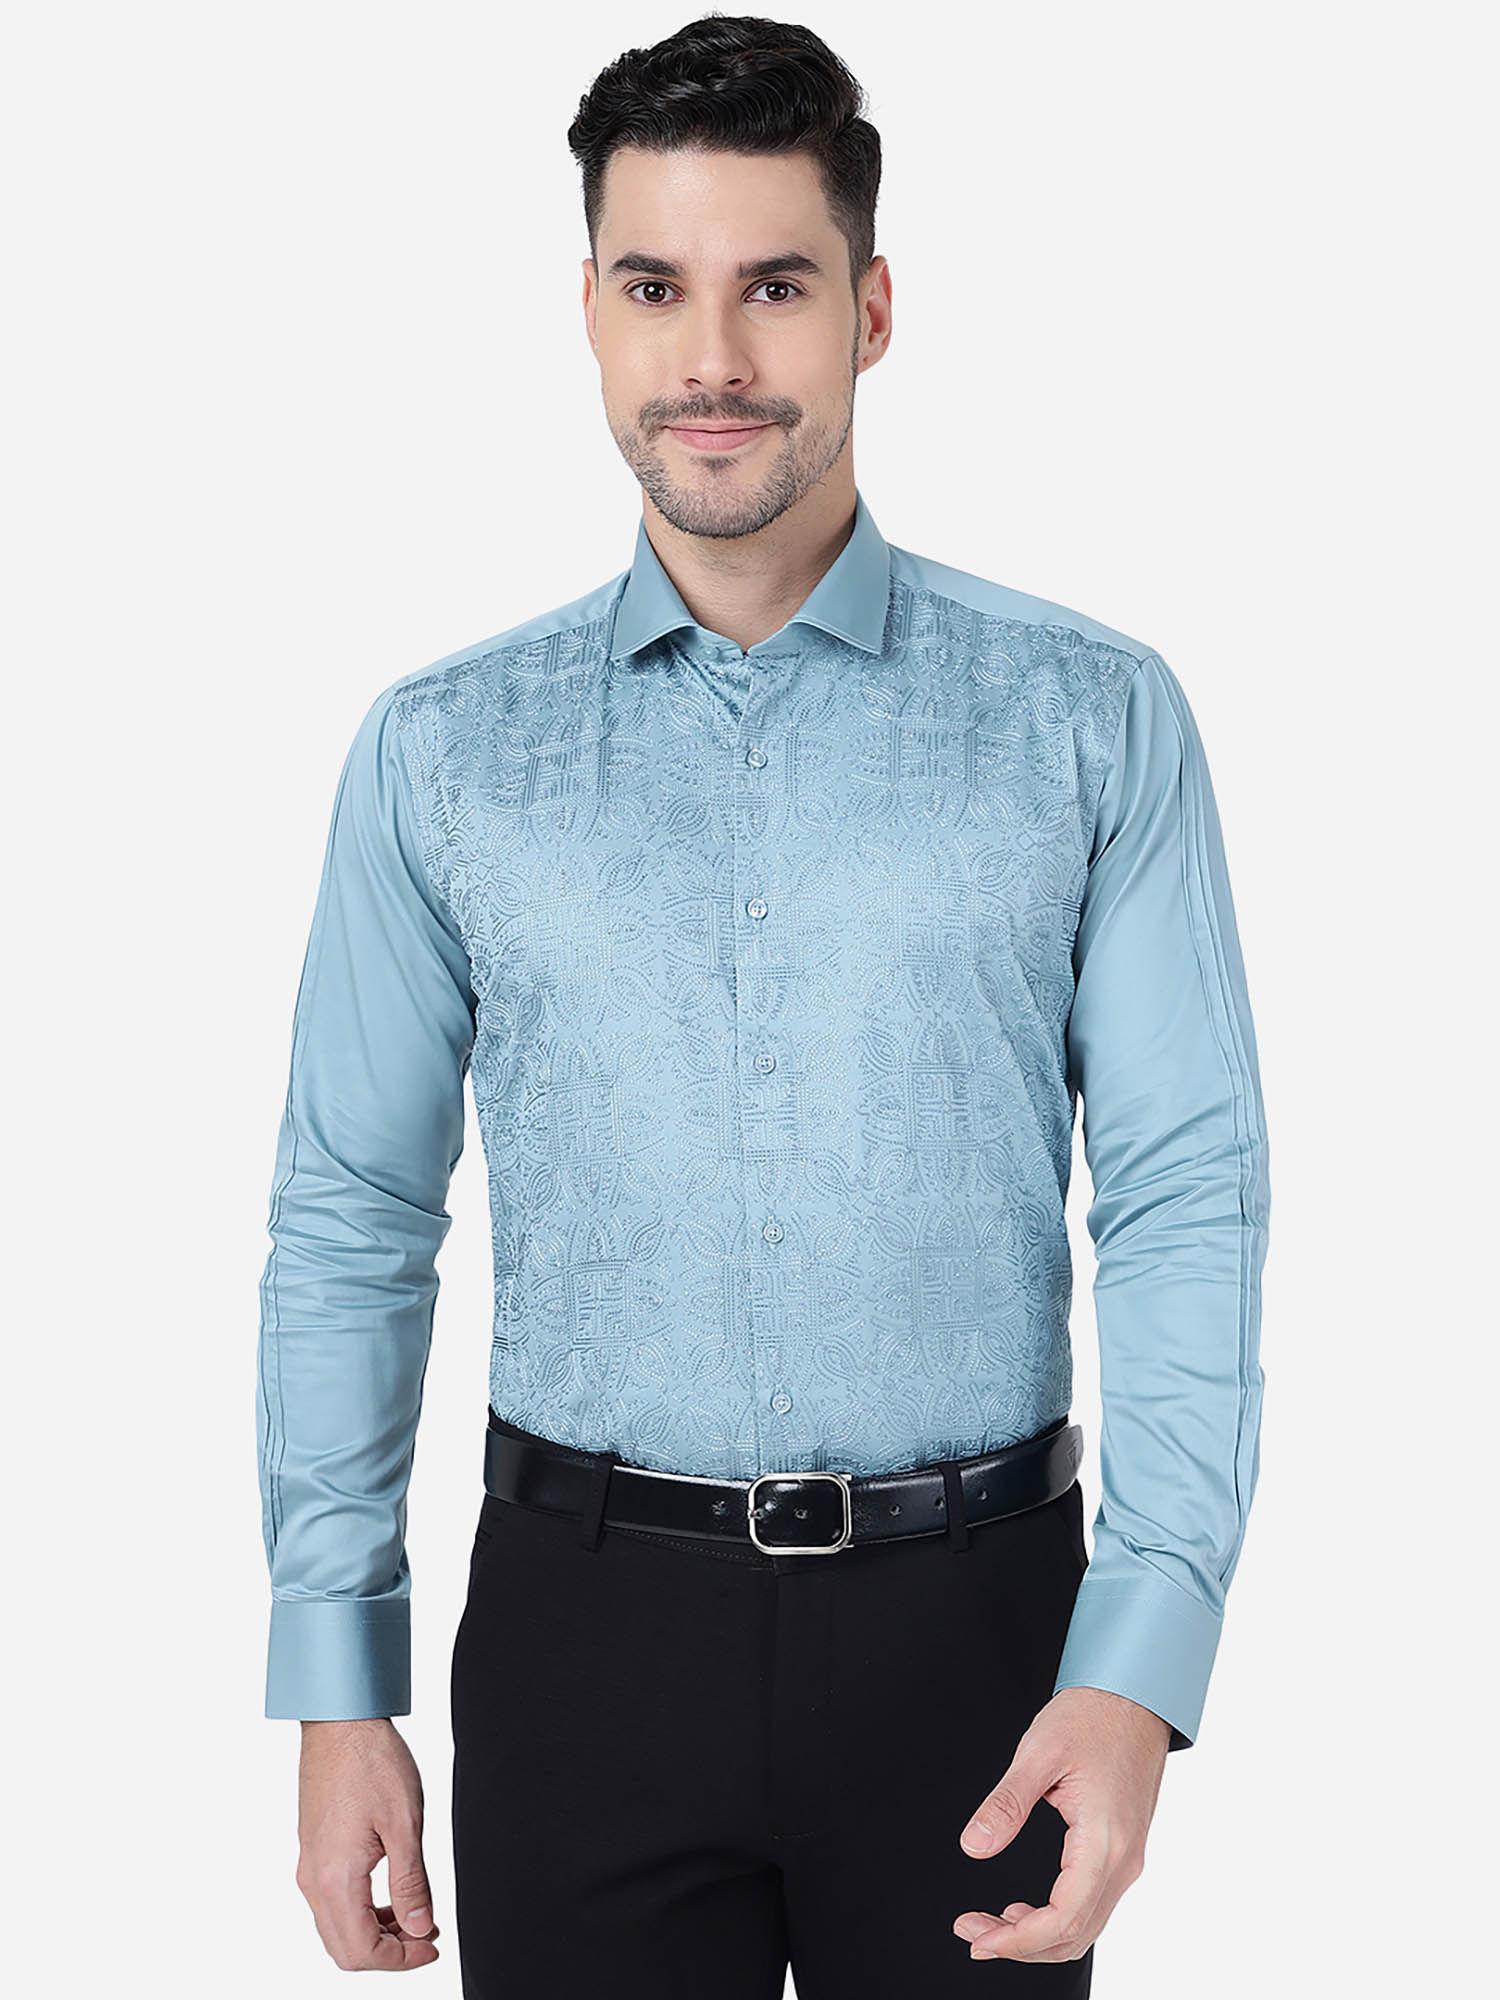 jb mint blue 100% cotton slim fit embroidered formal party wear shirt